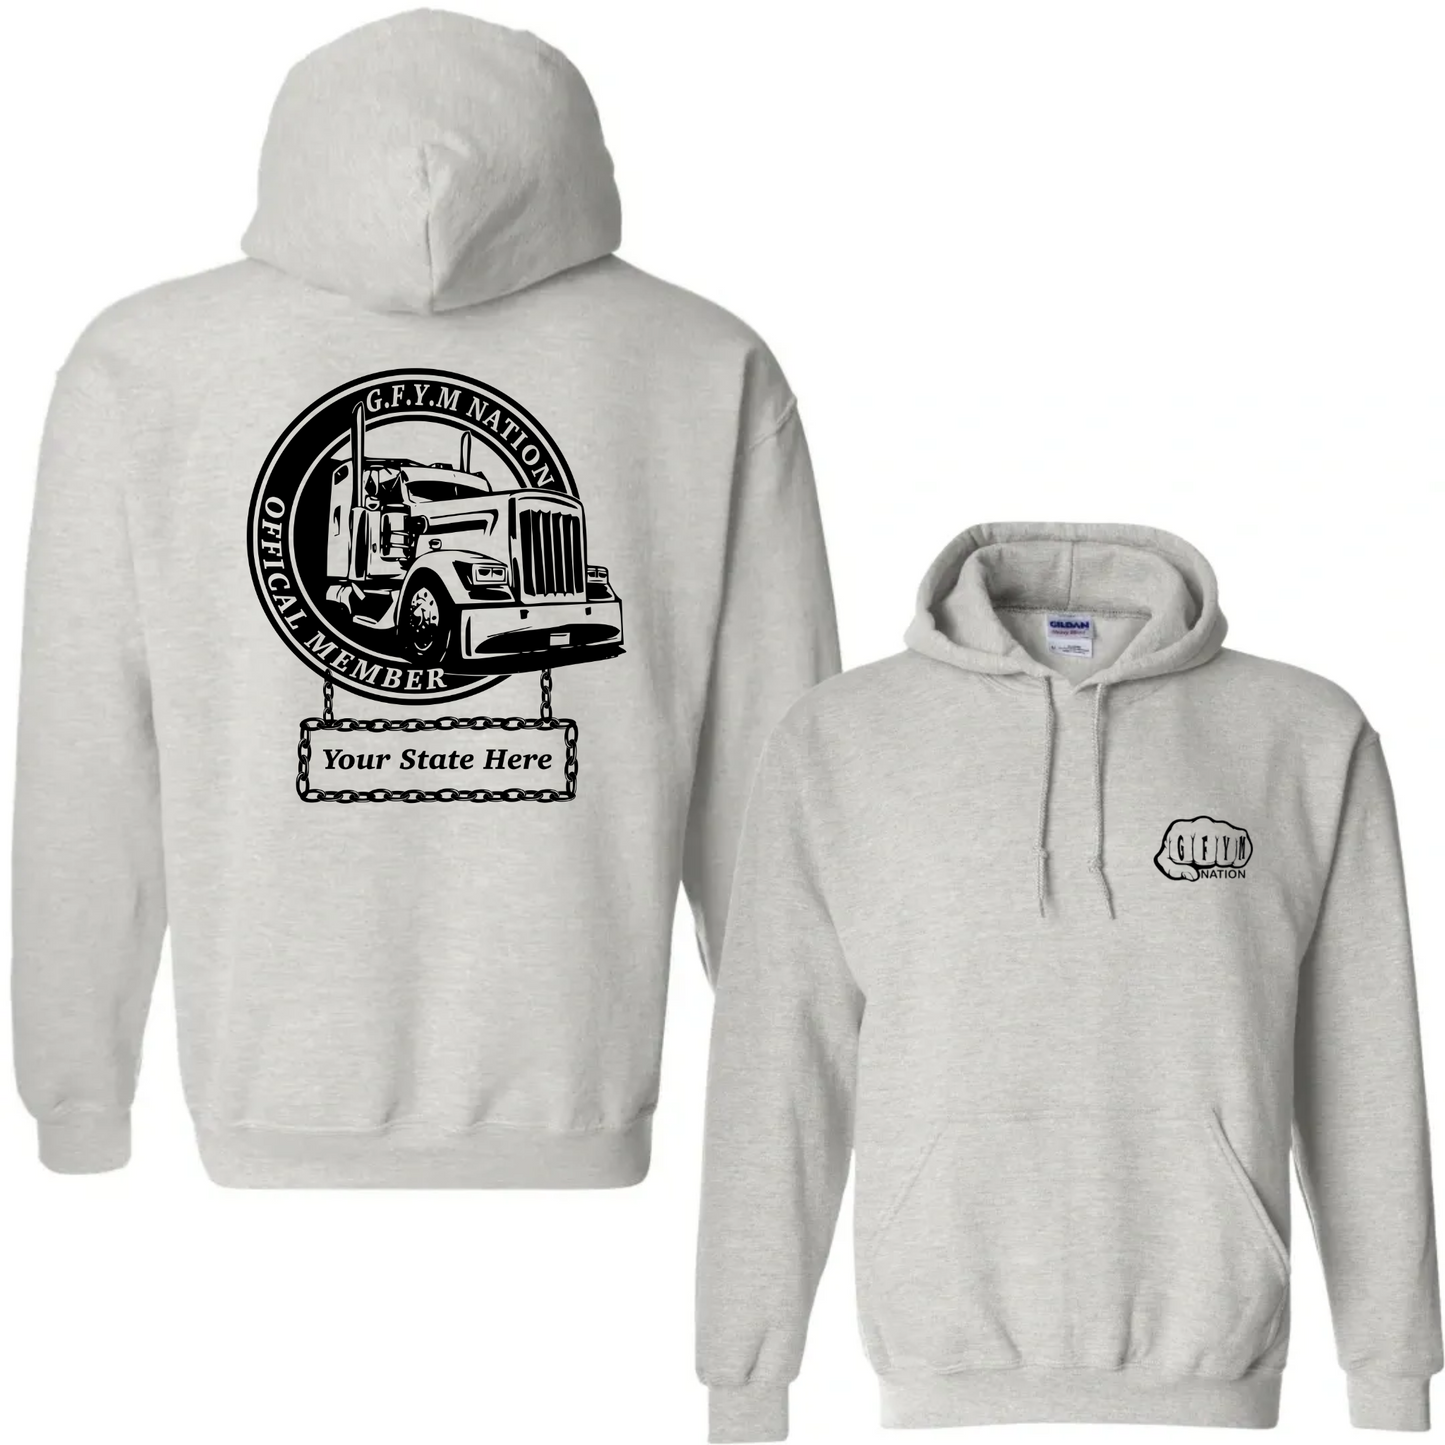 GFYM (With Your State) State Member Hoodie